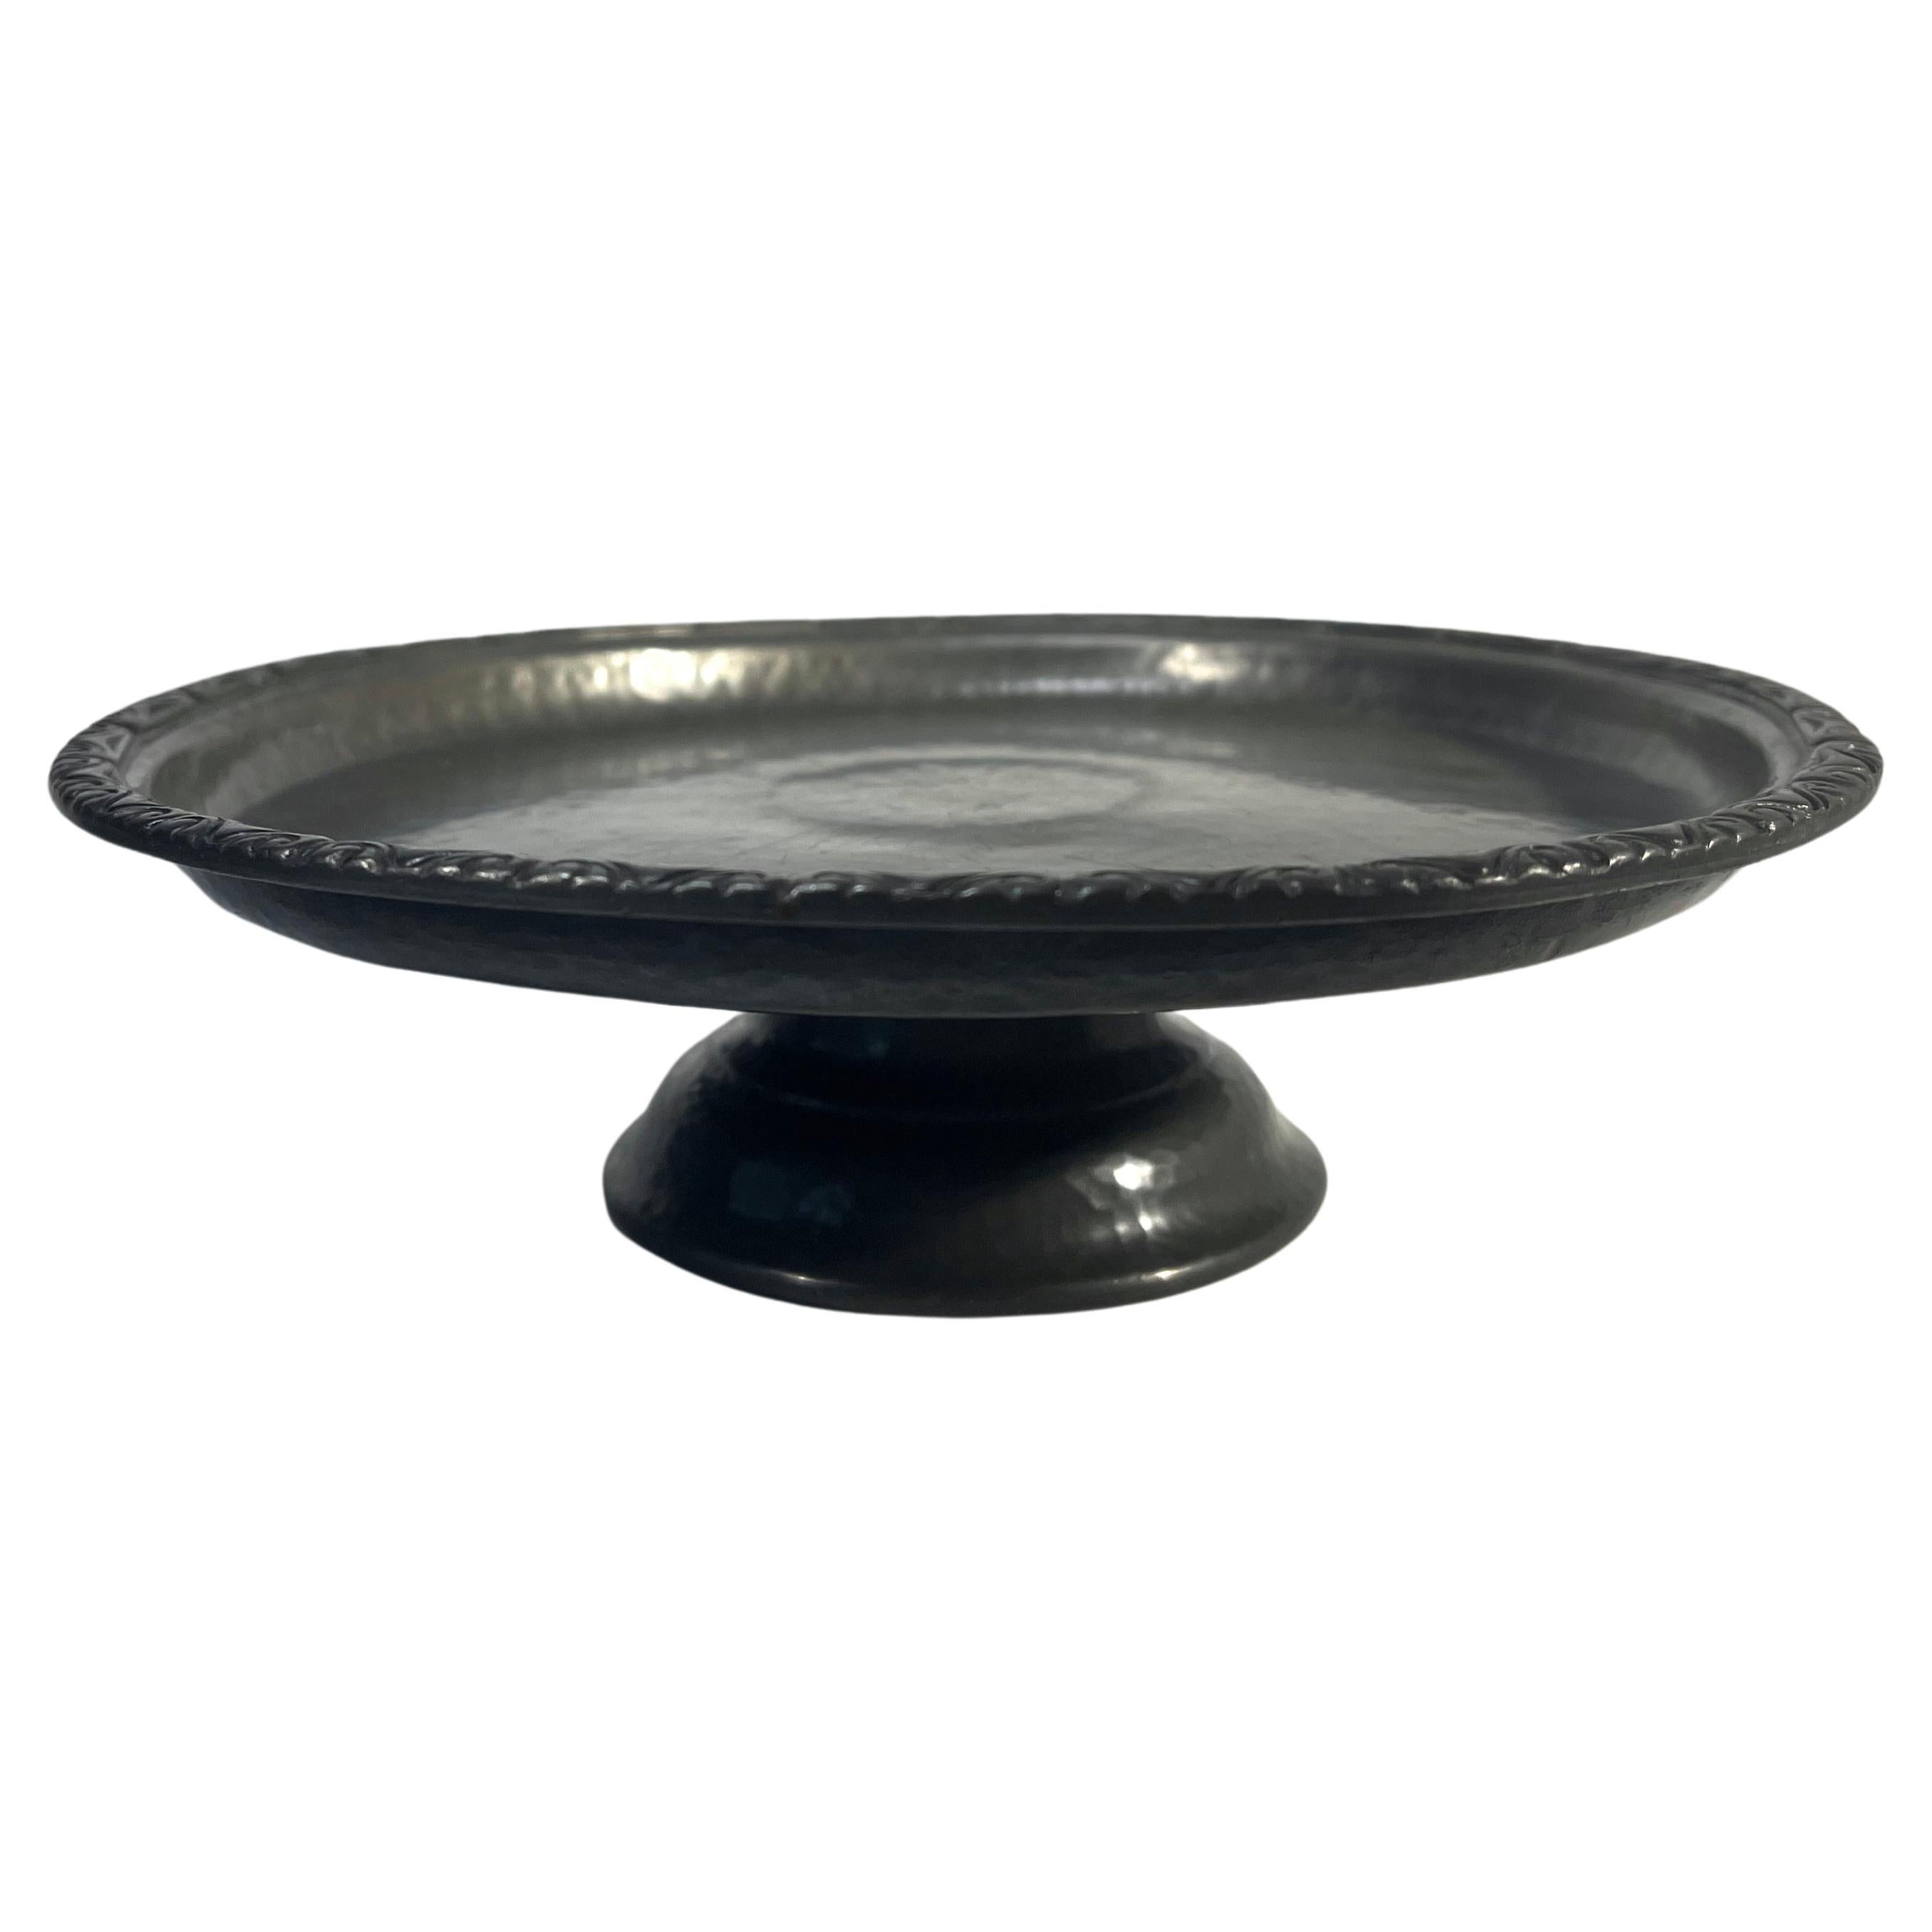 Art Nouveau Footed Tray Made By Liberty & Co., English Hammered Antique Pewter  For Sale